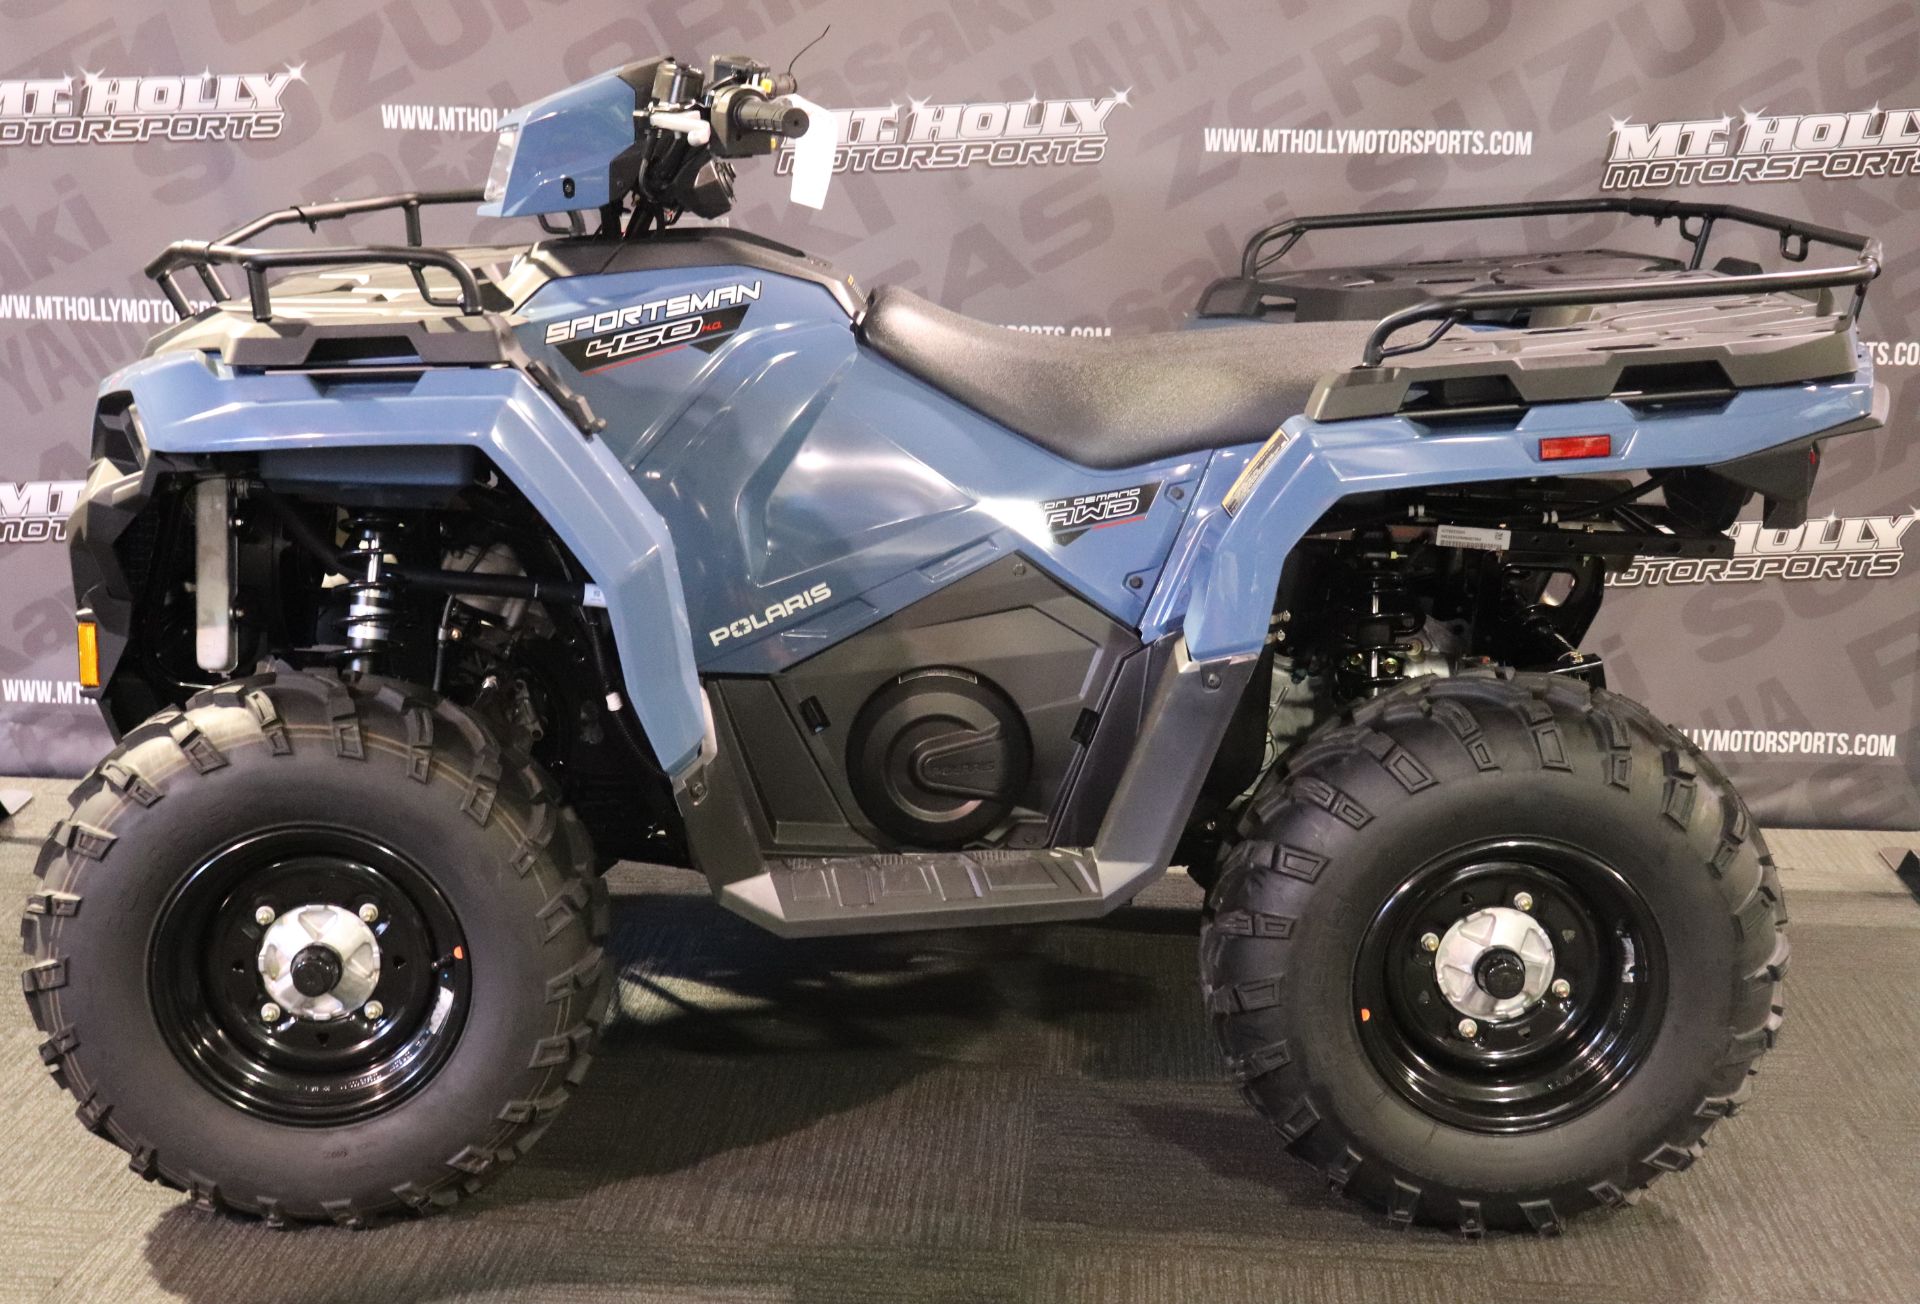 2022 Polaris Sportsman 450 H.O. EPS in Vincentown, New Jersey - Photo 1